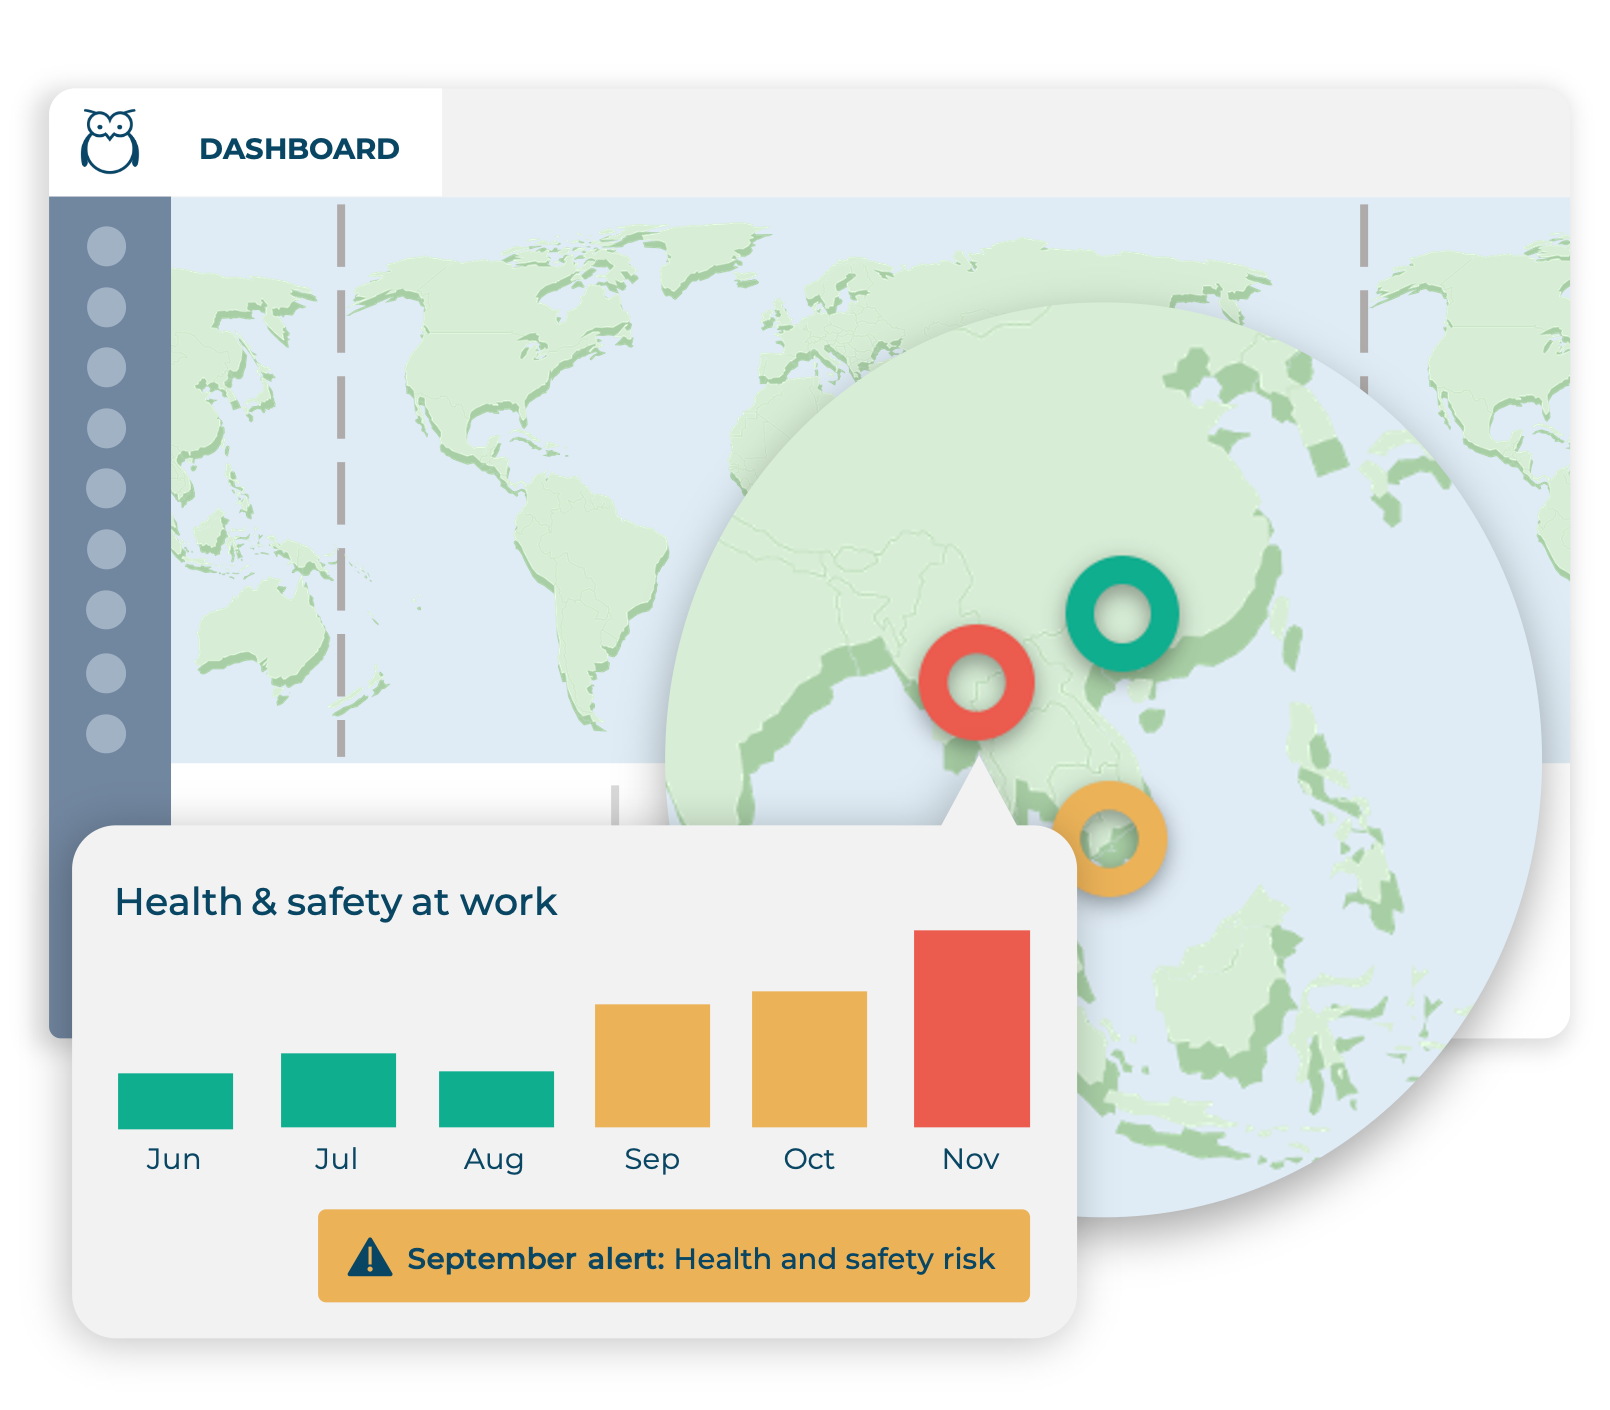 Ulula dashboard map view with color-coded donuts increased risk in the 'health and safety' category over time